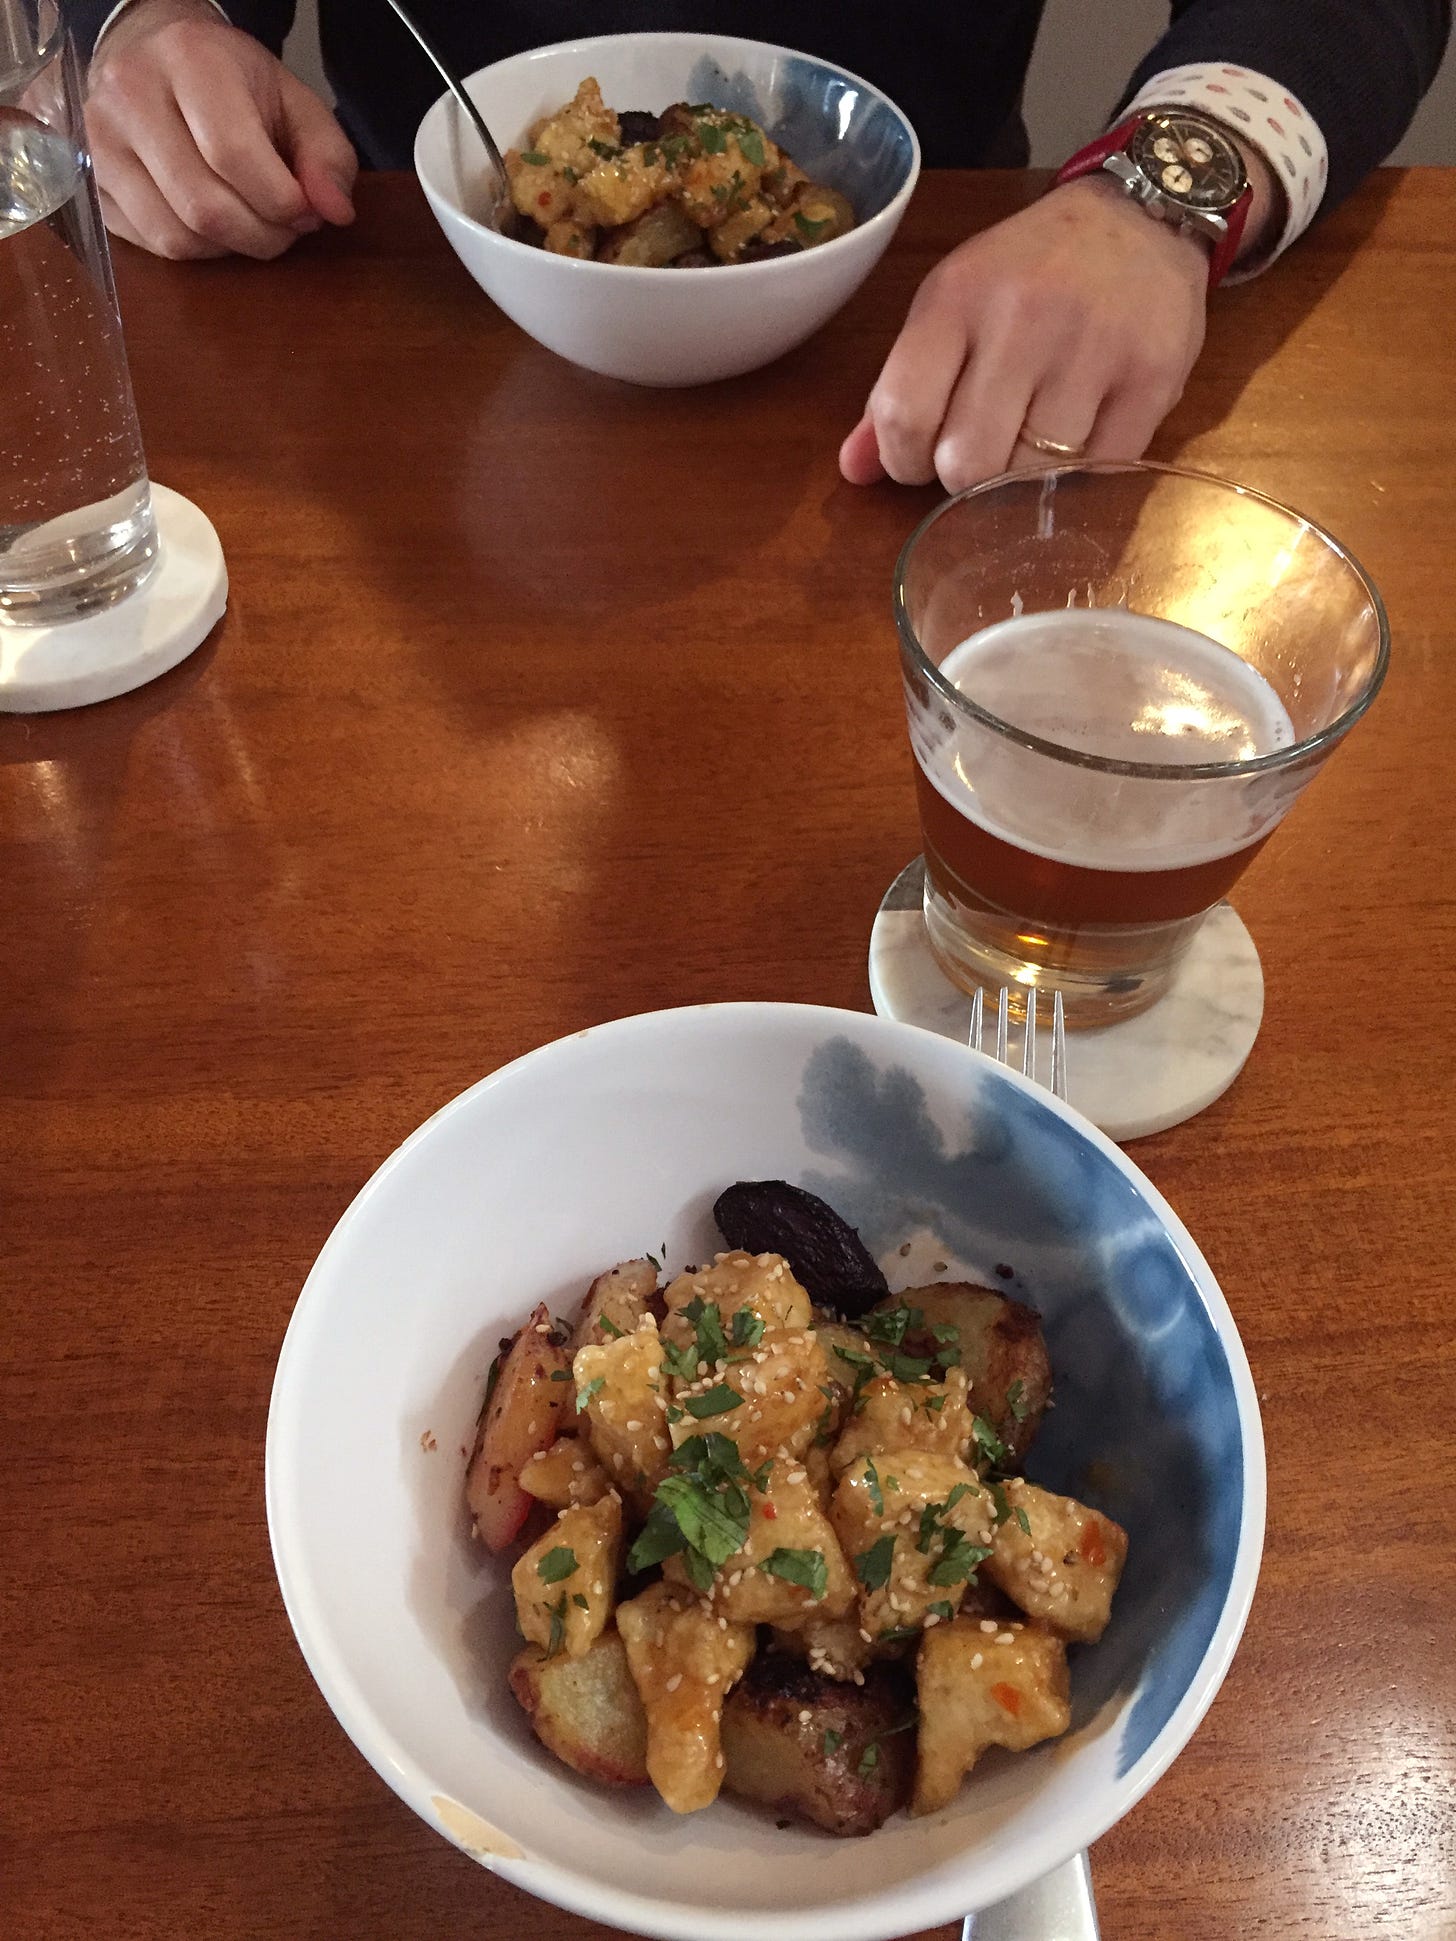 Two white and blue bowls on the table across from each other, and a beer and a glass of water on coasters. In the bowls are pieces of the crispy tofu coated in sweet chili sauce and sprinkled with sesame seeds and cilantro. Just visible below the tofu are pieces of potato, purple carrot, and beet.